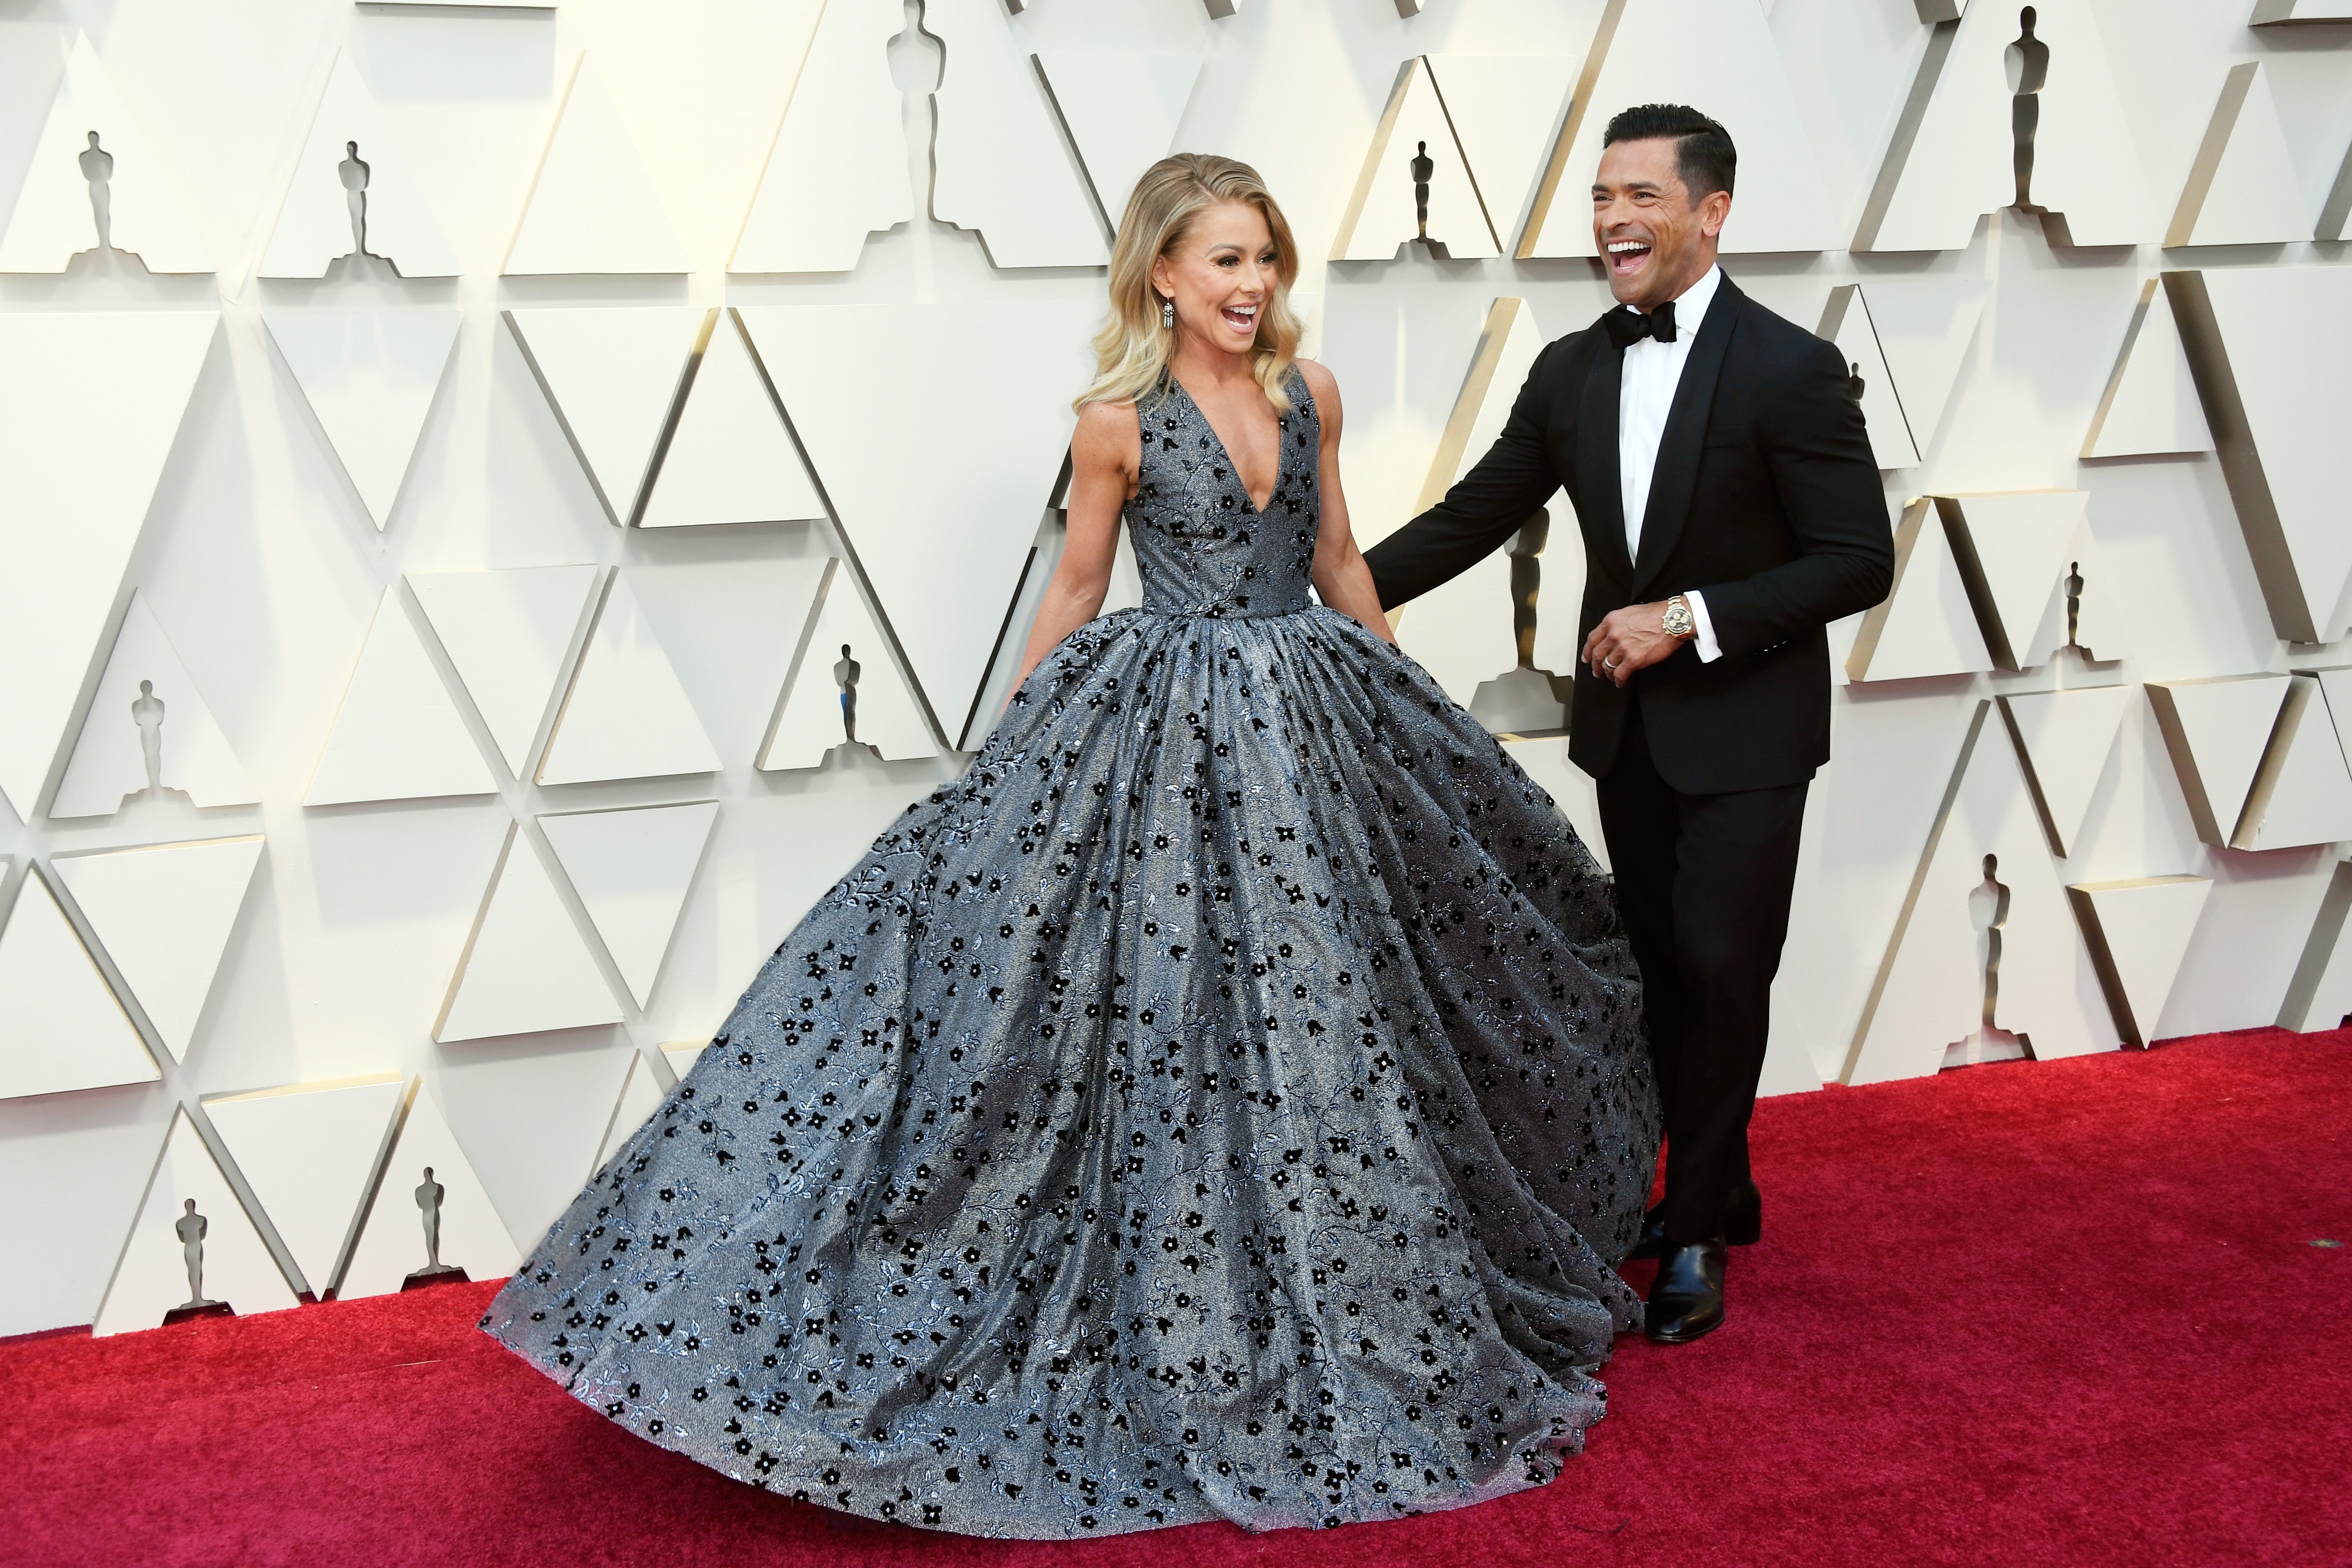 Kelly Ripa and Mark Consuelos attend the 91st Annual Academy Awards at Hollywood and Highland on February 24, 2019. | Source: Getty Images